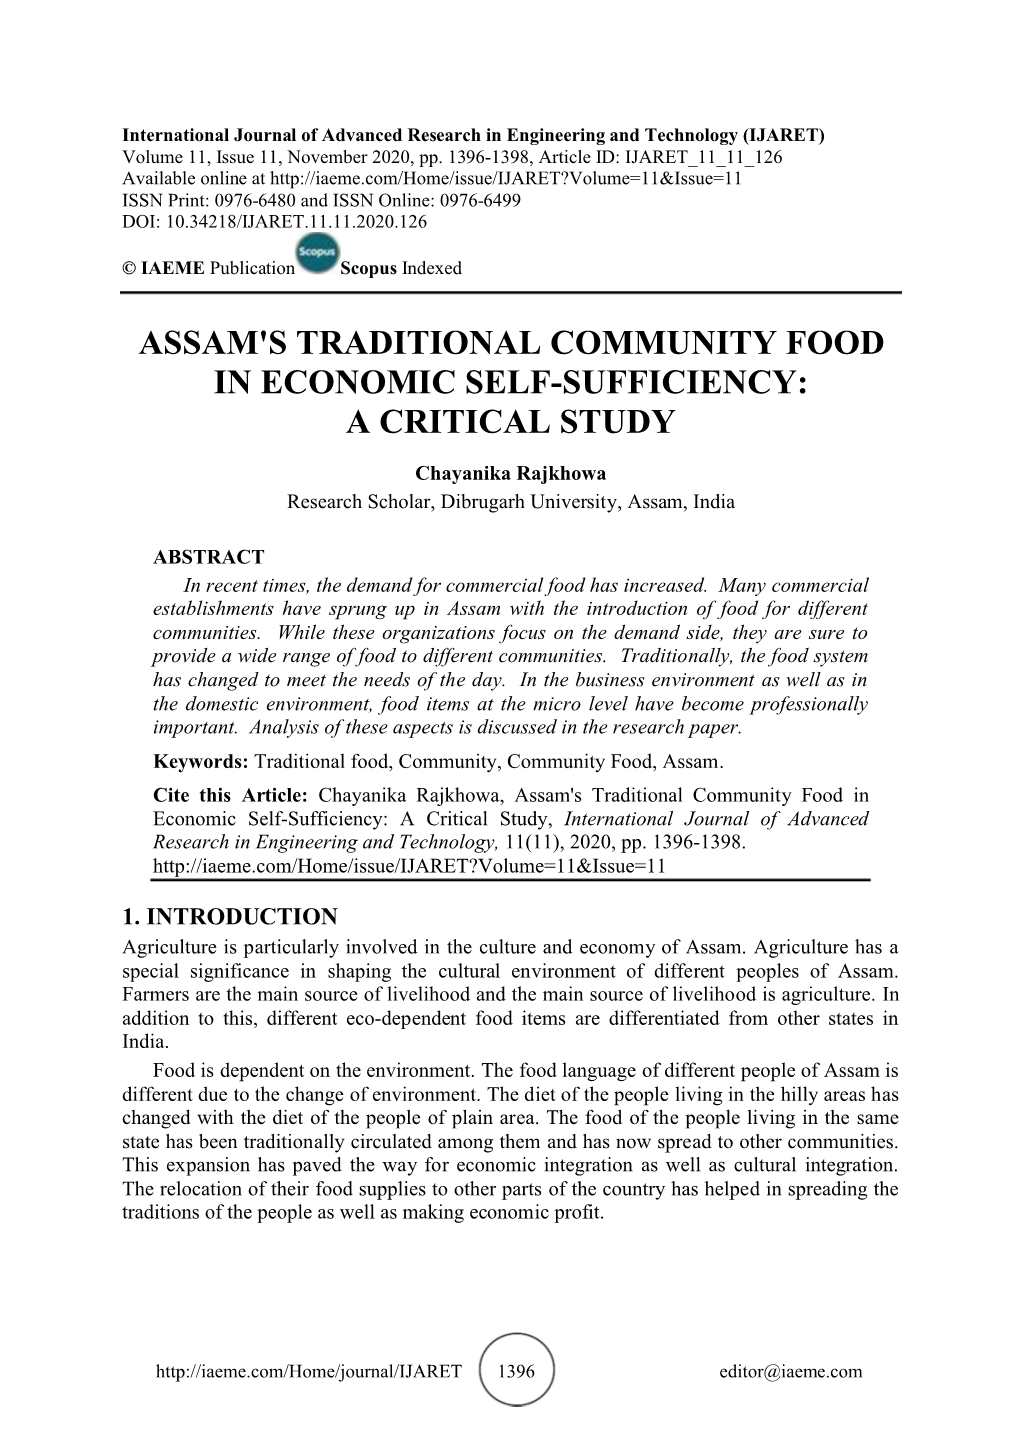 Assam's Traditional Community Food in Economic Self-Sufficiency: a Critical Study